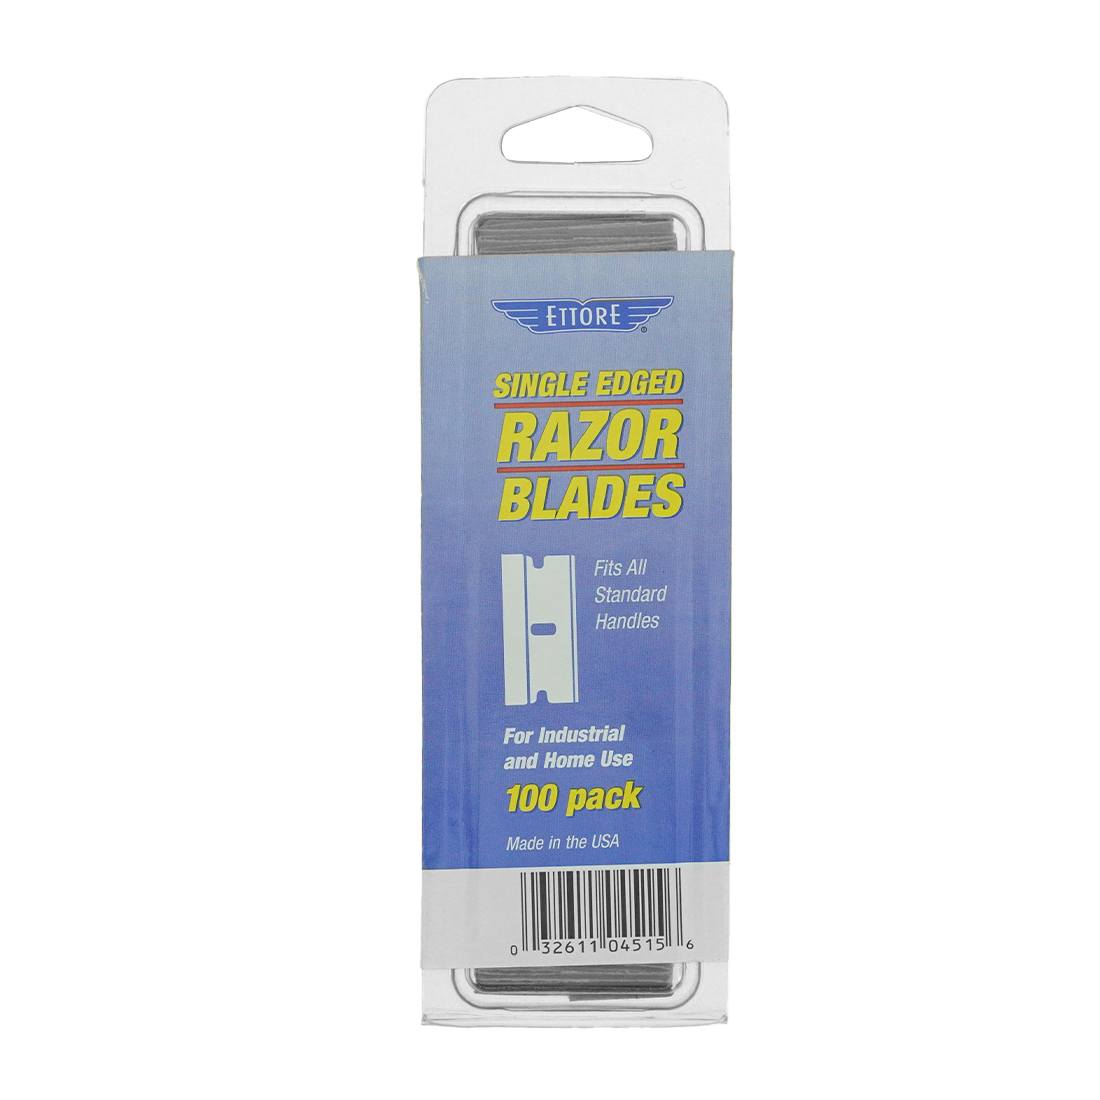 Ettore Replacement Carbon Blades - 1.5 Inch Pack View